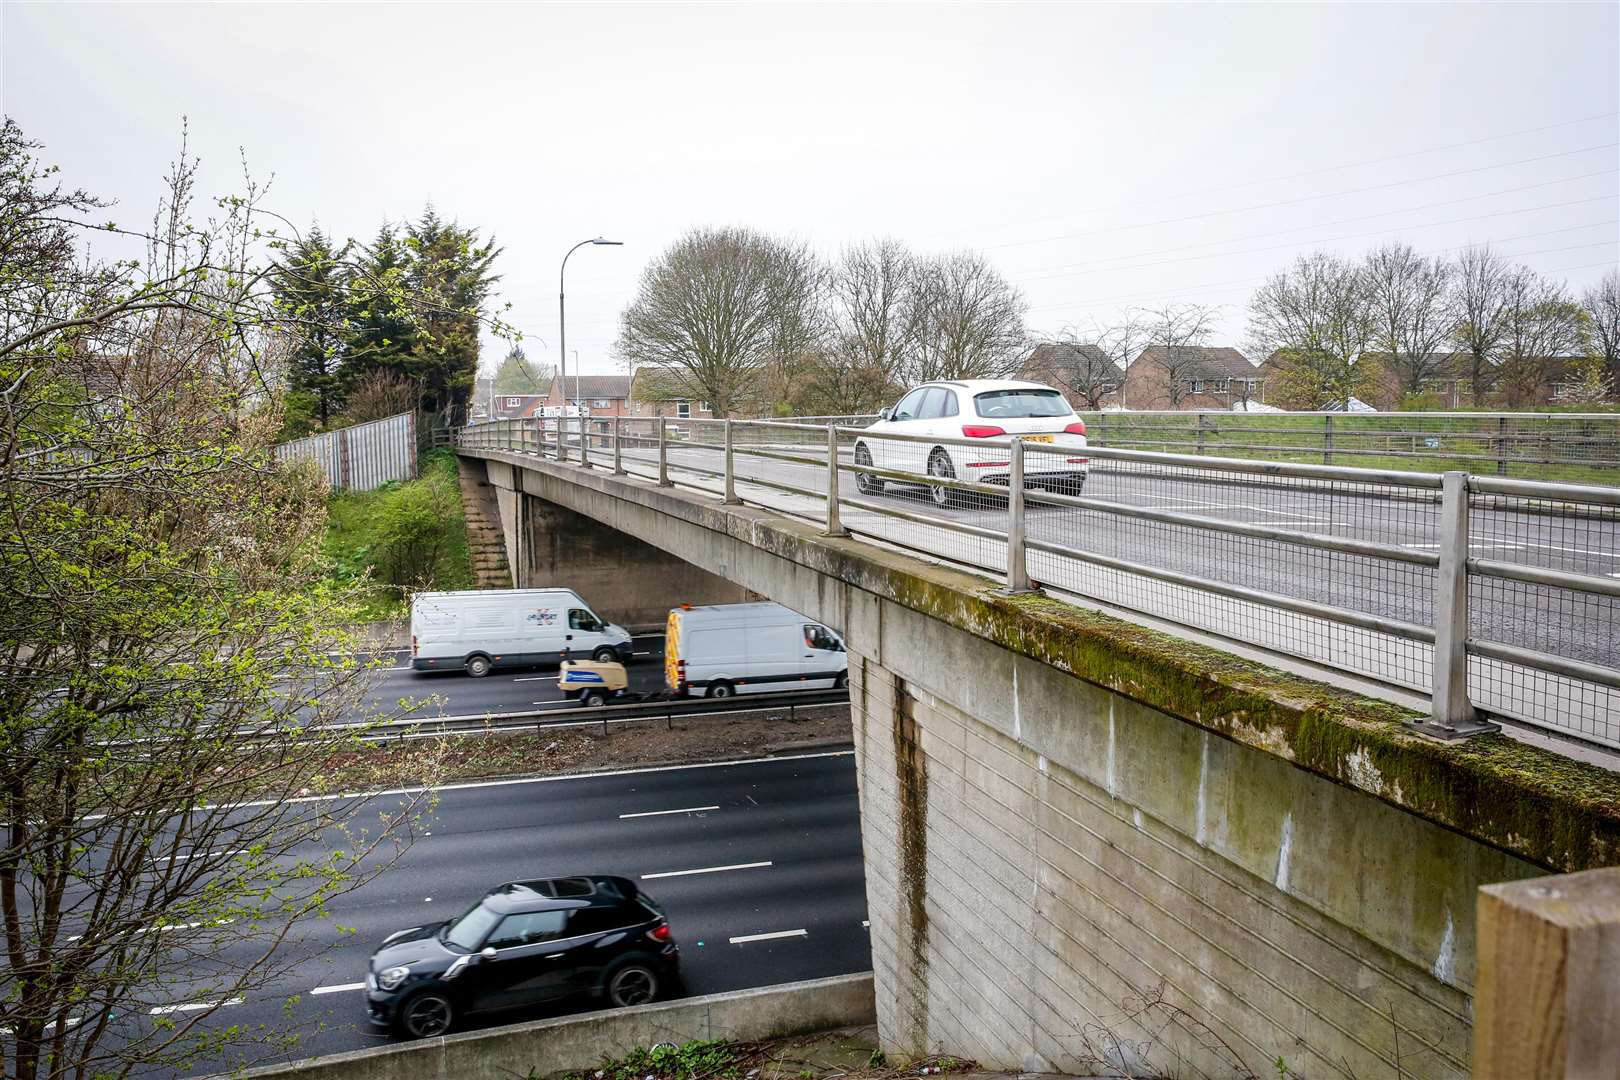 Lunsford Lane bridge over the M20 at Larkfield where a man fell and died on the M20 on Saturday night